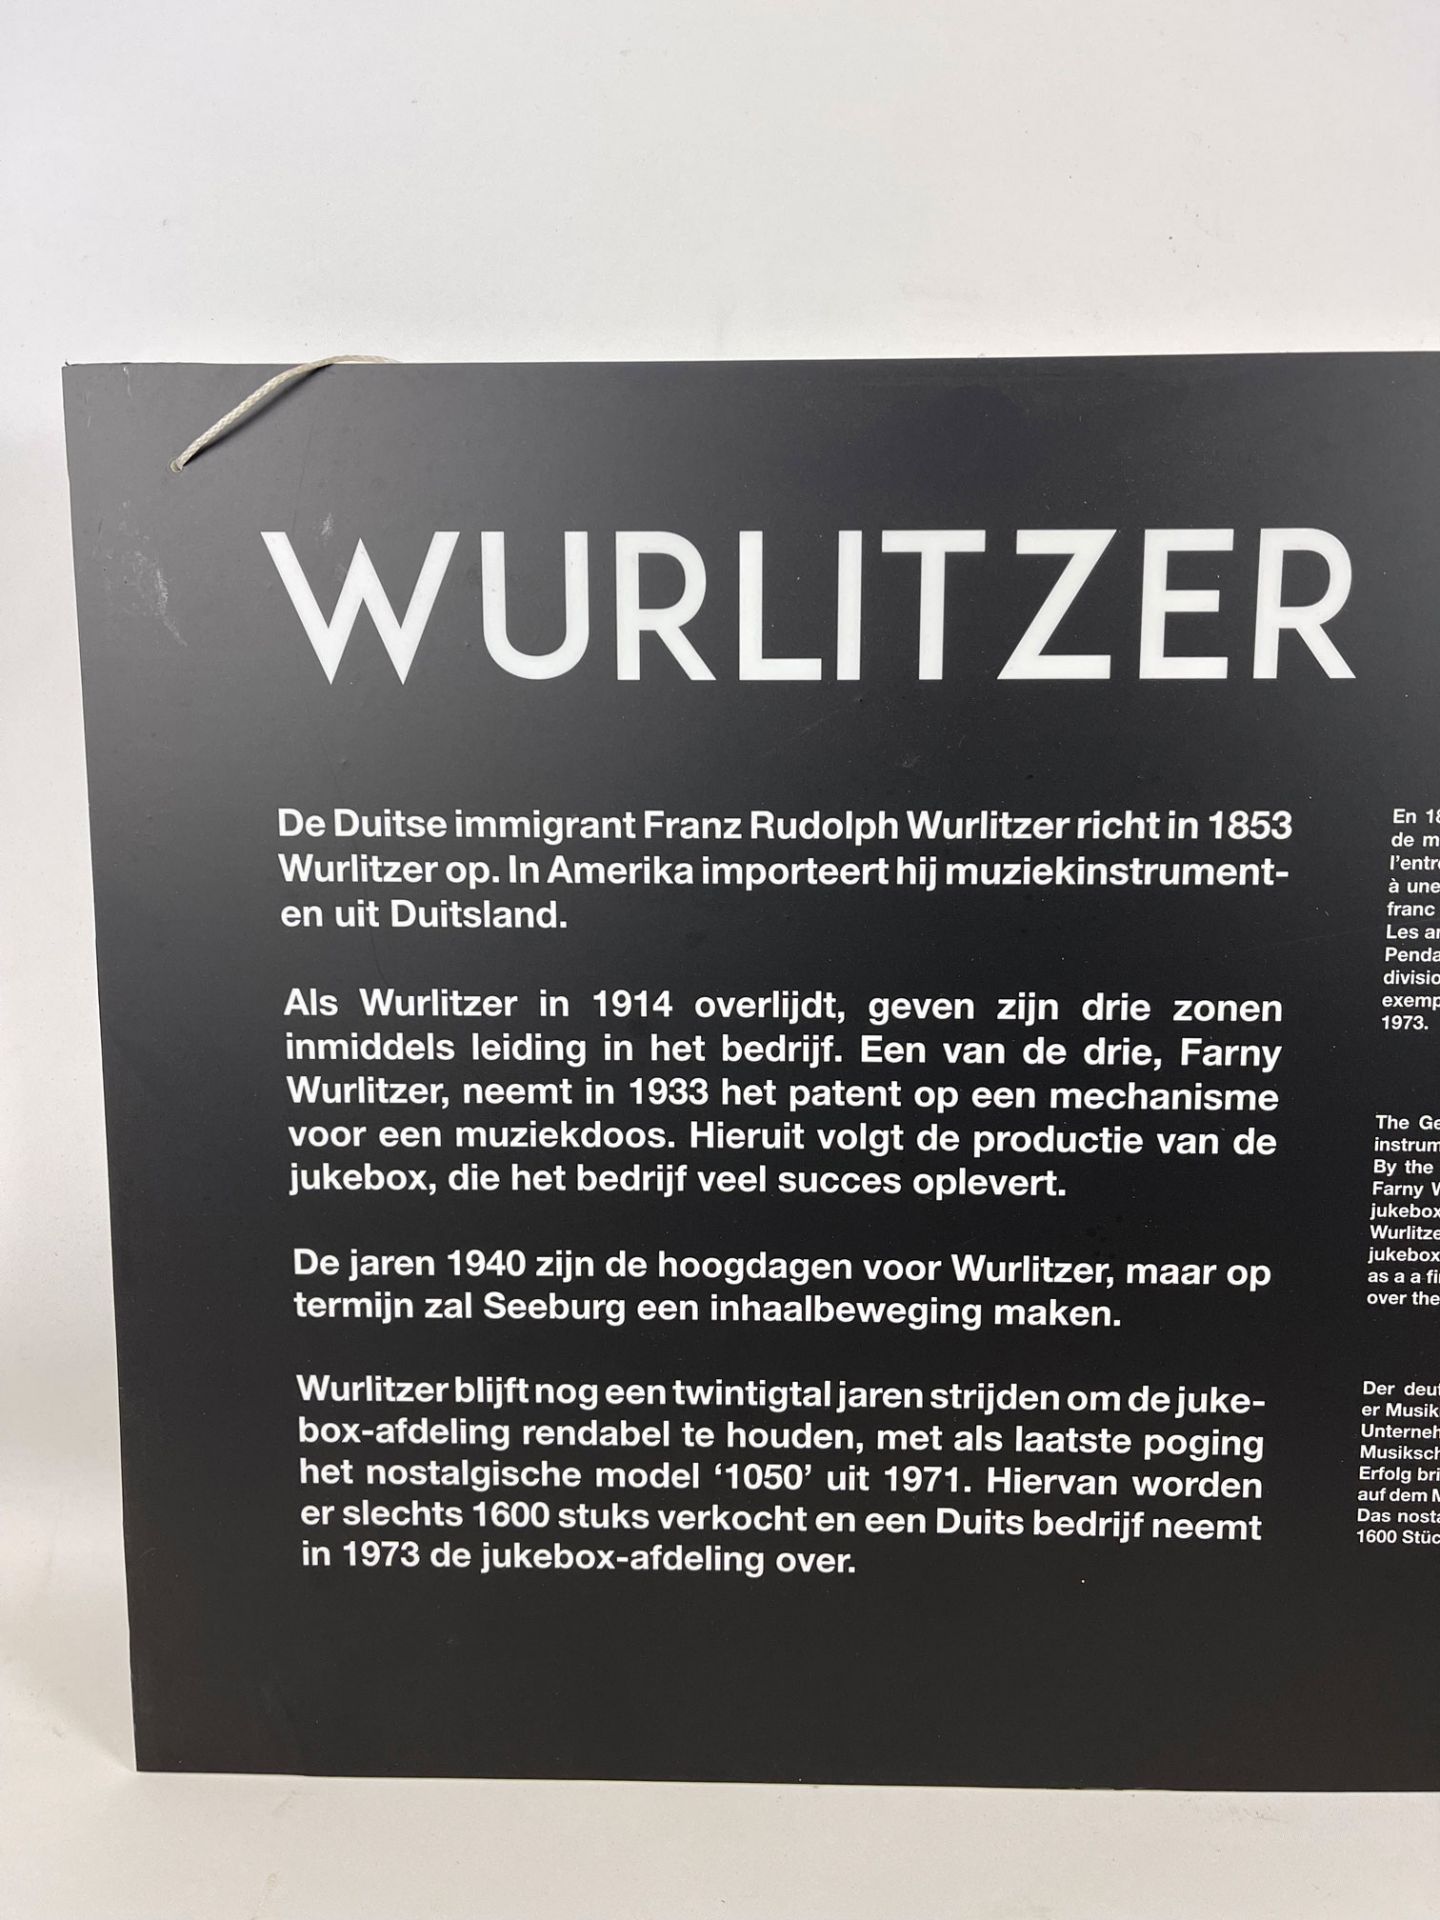 Multiple Language Info Sign from the Museum De Panne Wurlitzer Jukebox Section - Image 4 of 5